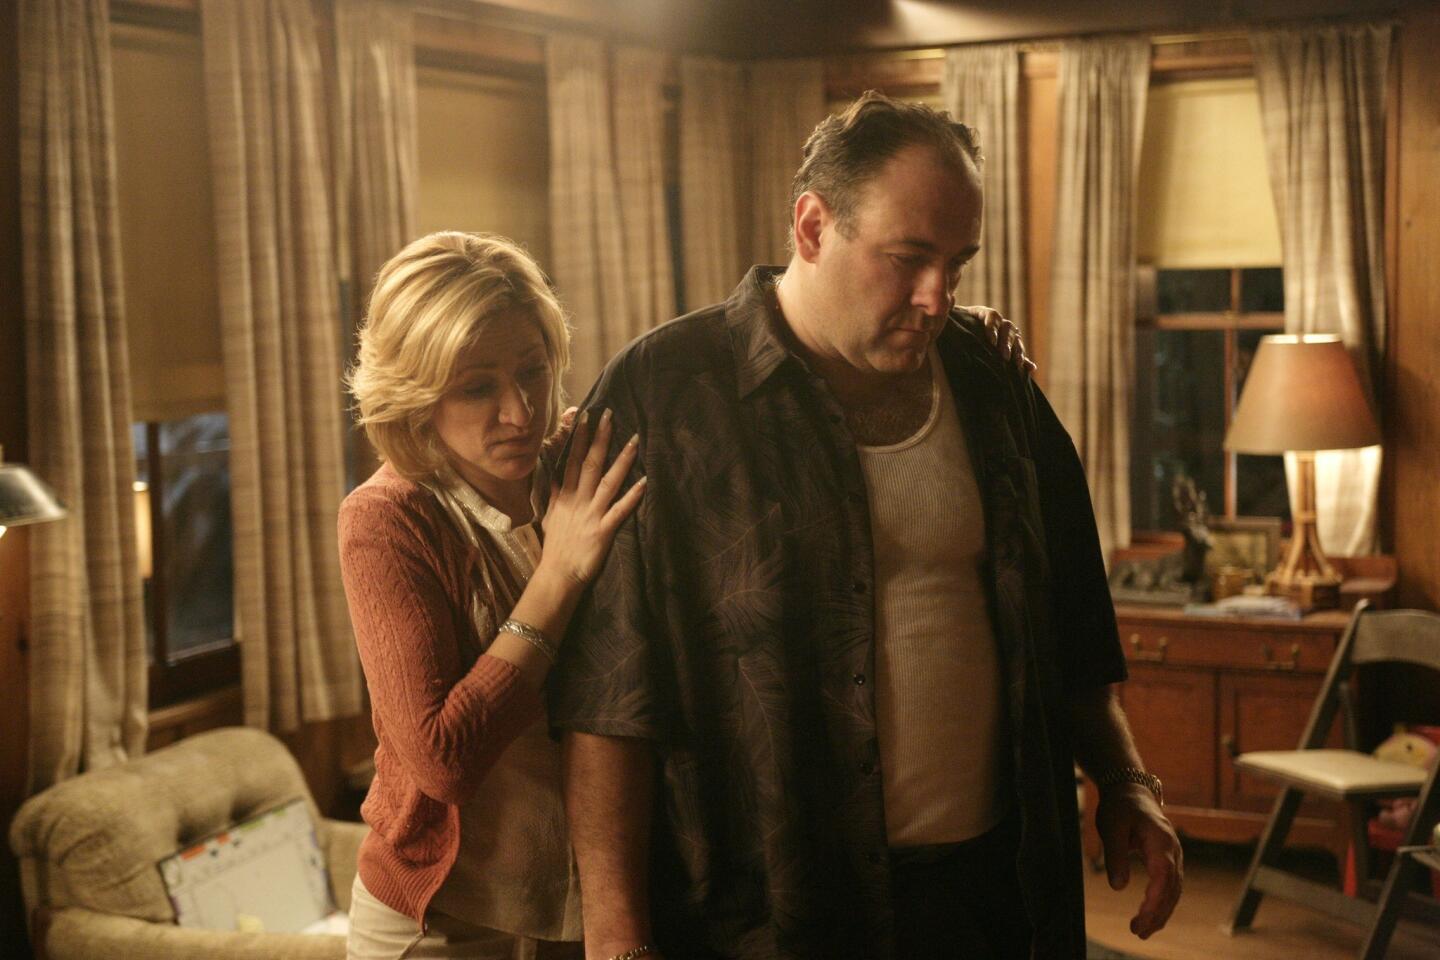 Edie Falco portrays Carmela Soprano and James Gandolfini plays Tony Soprano in a scene from one of the last episodes of the Emmy-winning HBO series "The Sopranos."